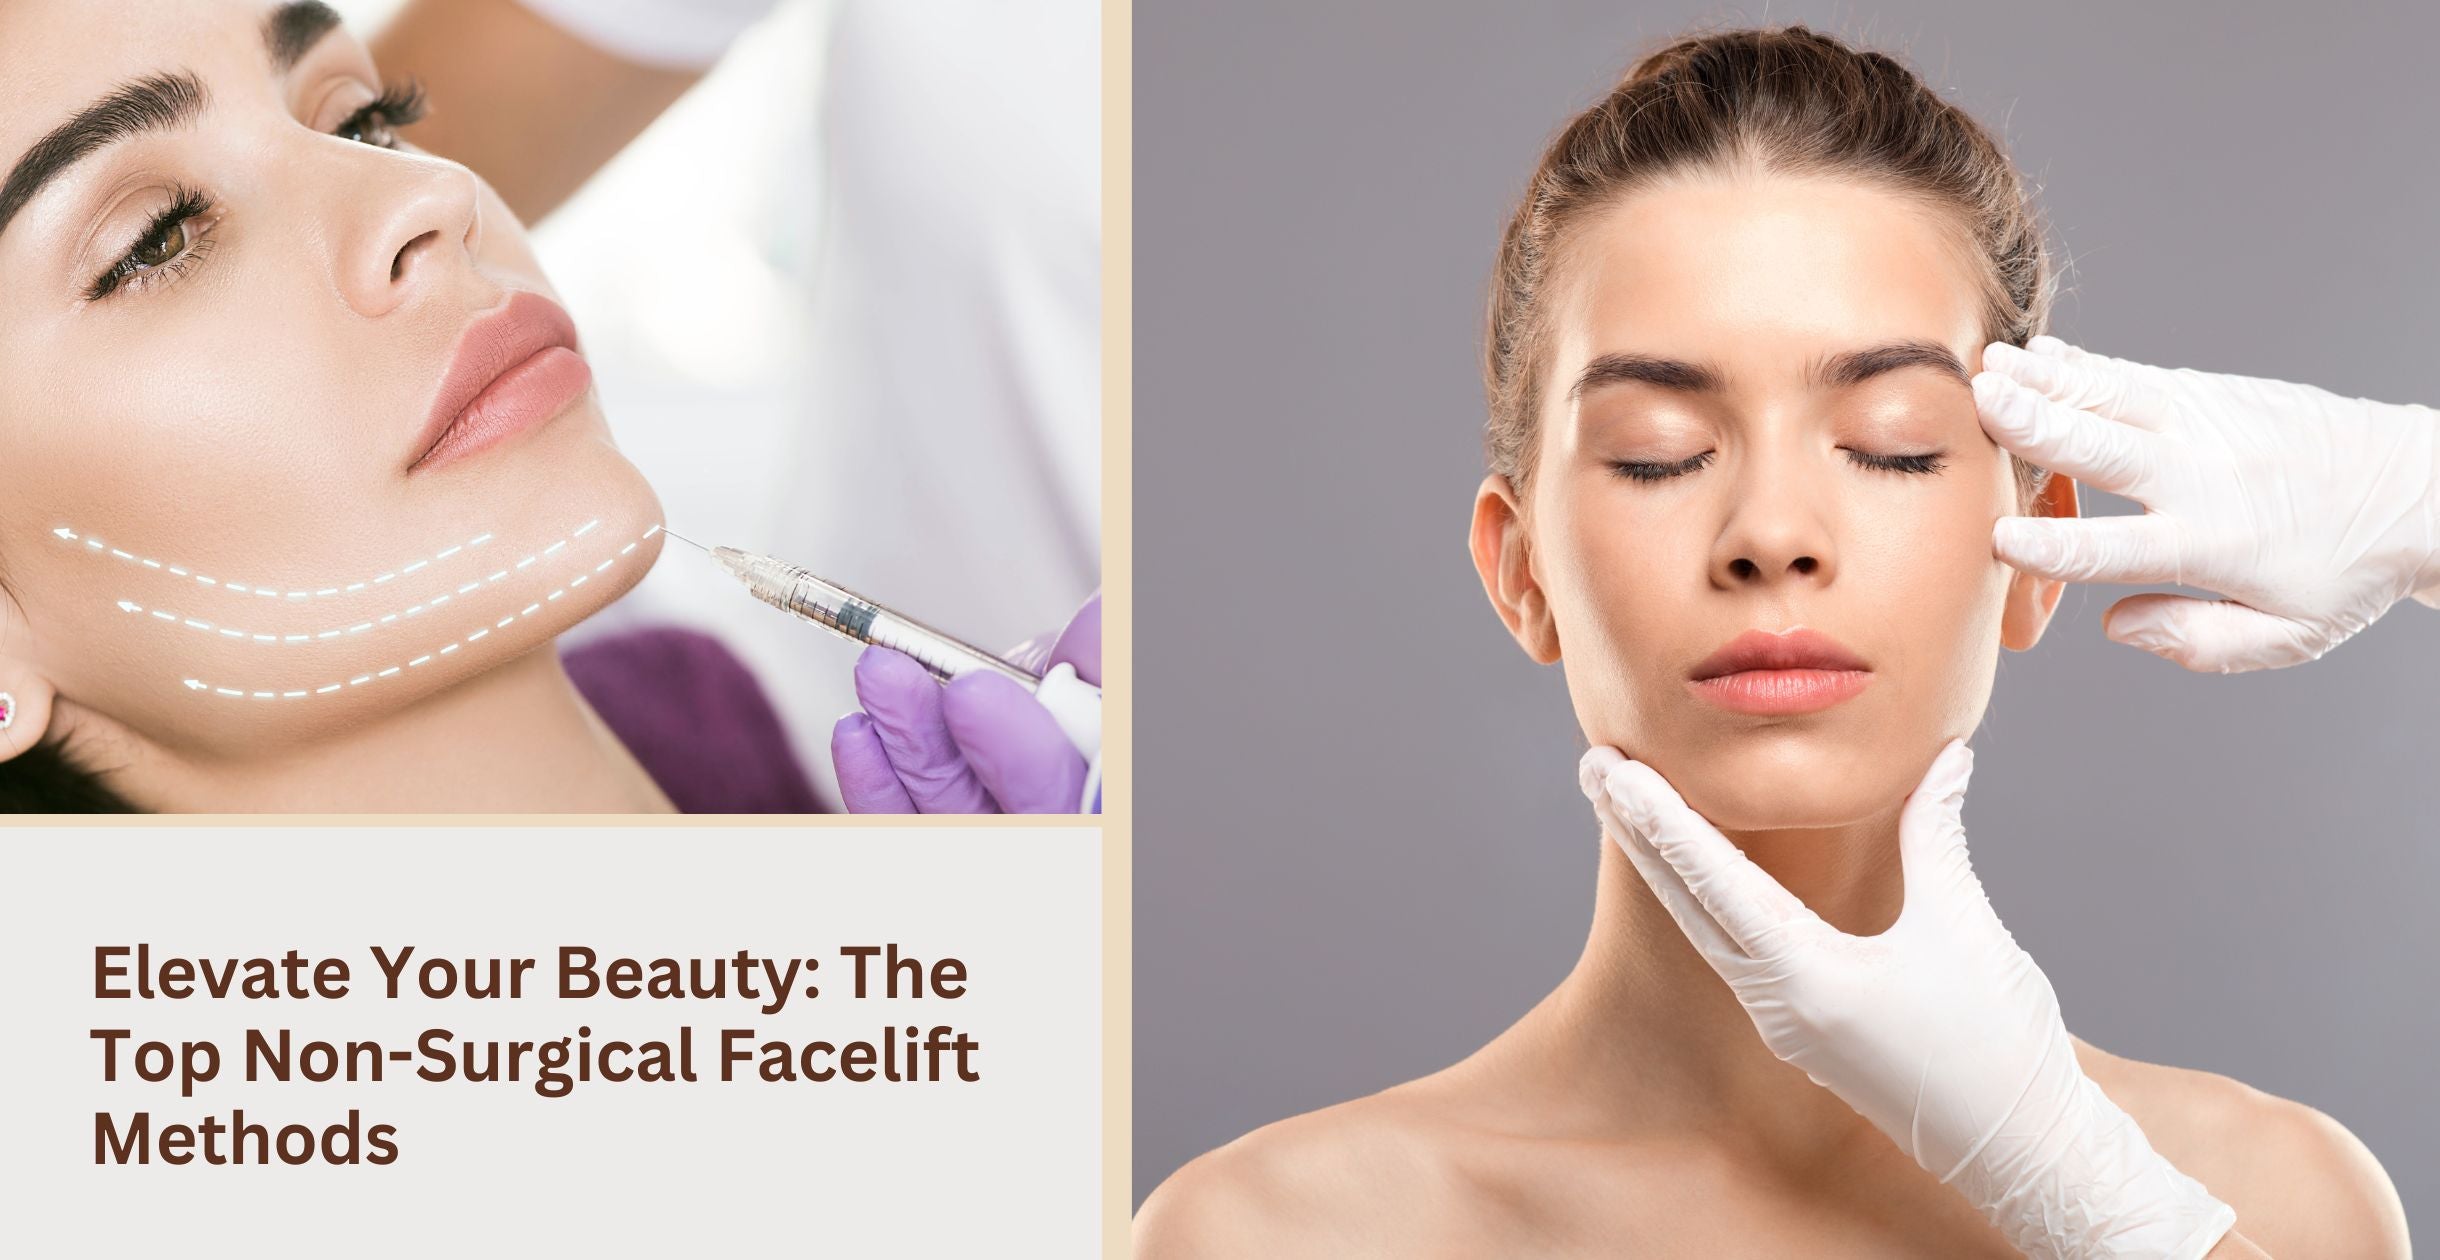 Elevate Your Beauty: The Top Non-Surgical Facelift Methods